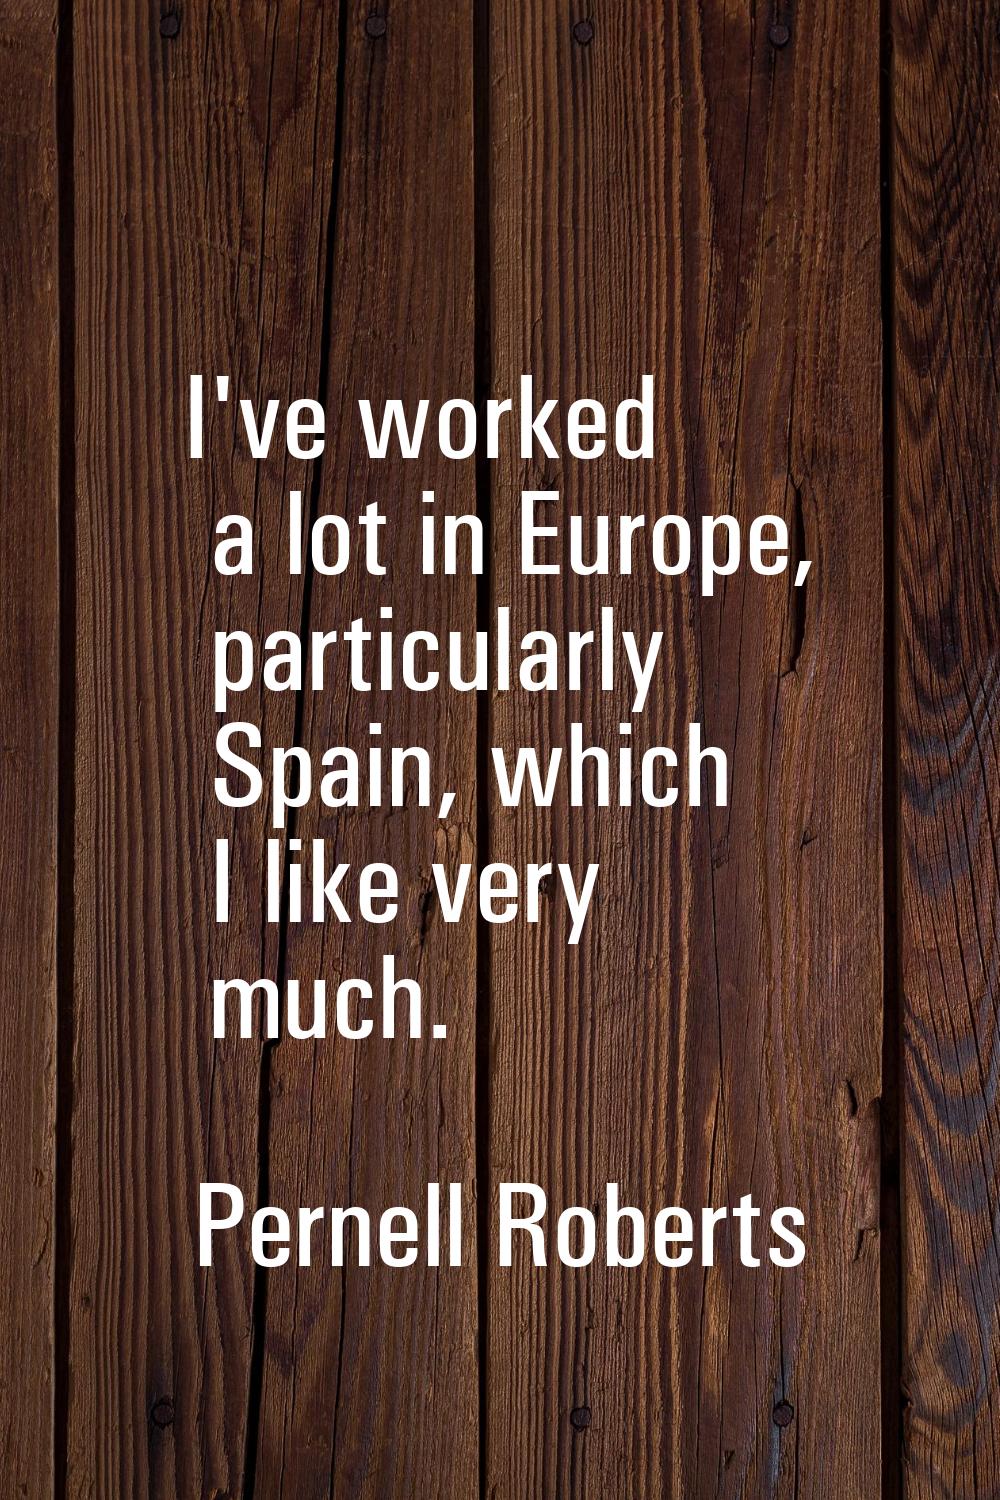 I've worked a lot in Europe, particularly Spain, which I like very much.